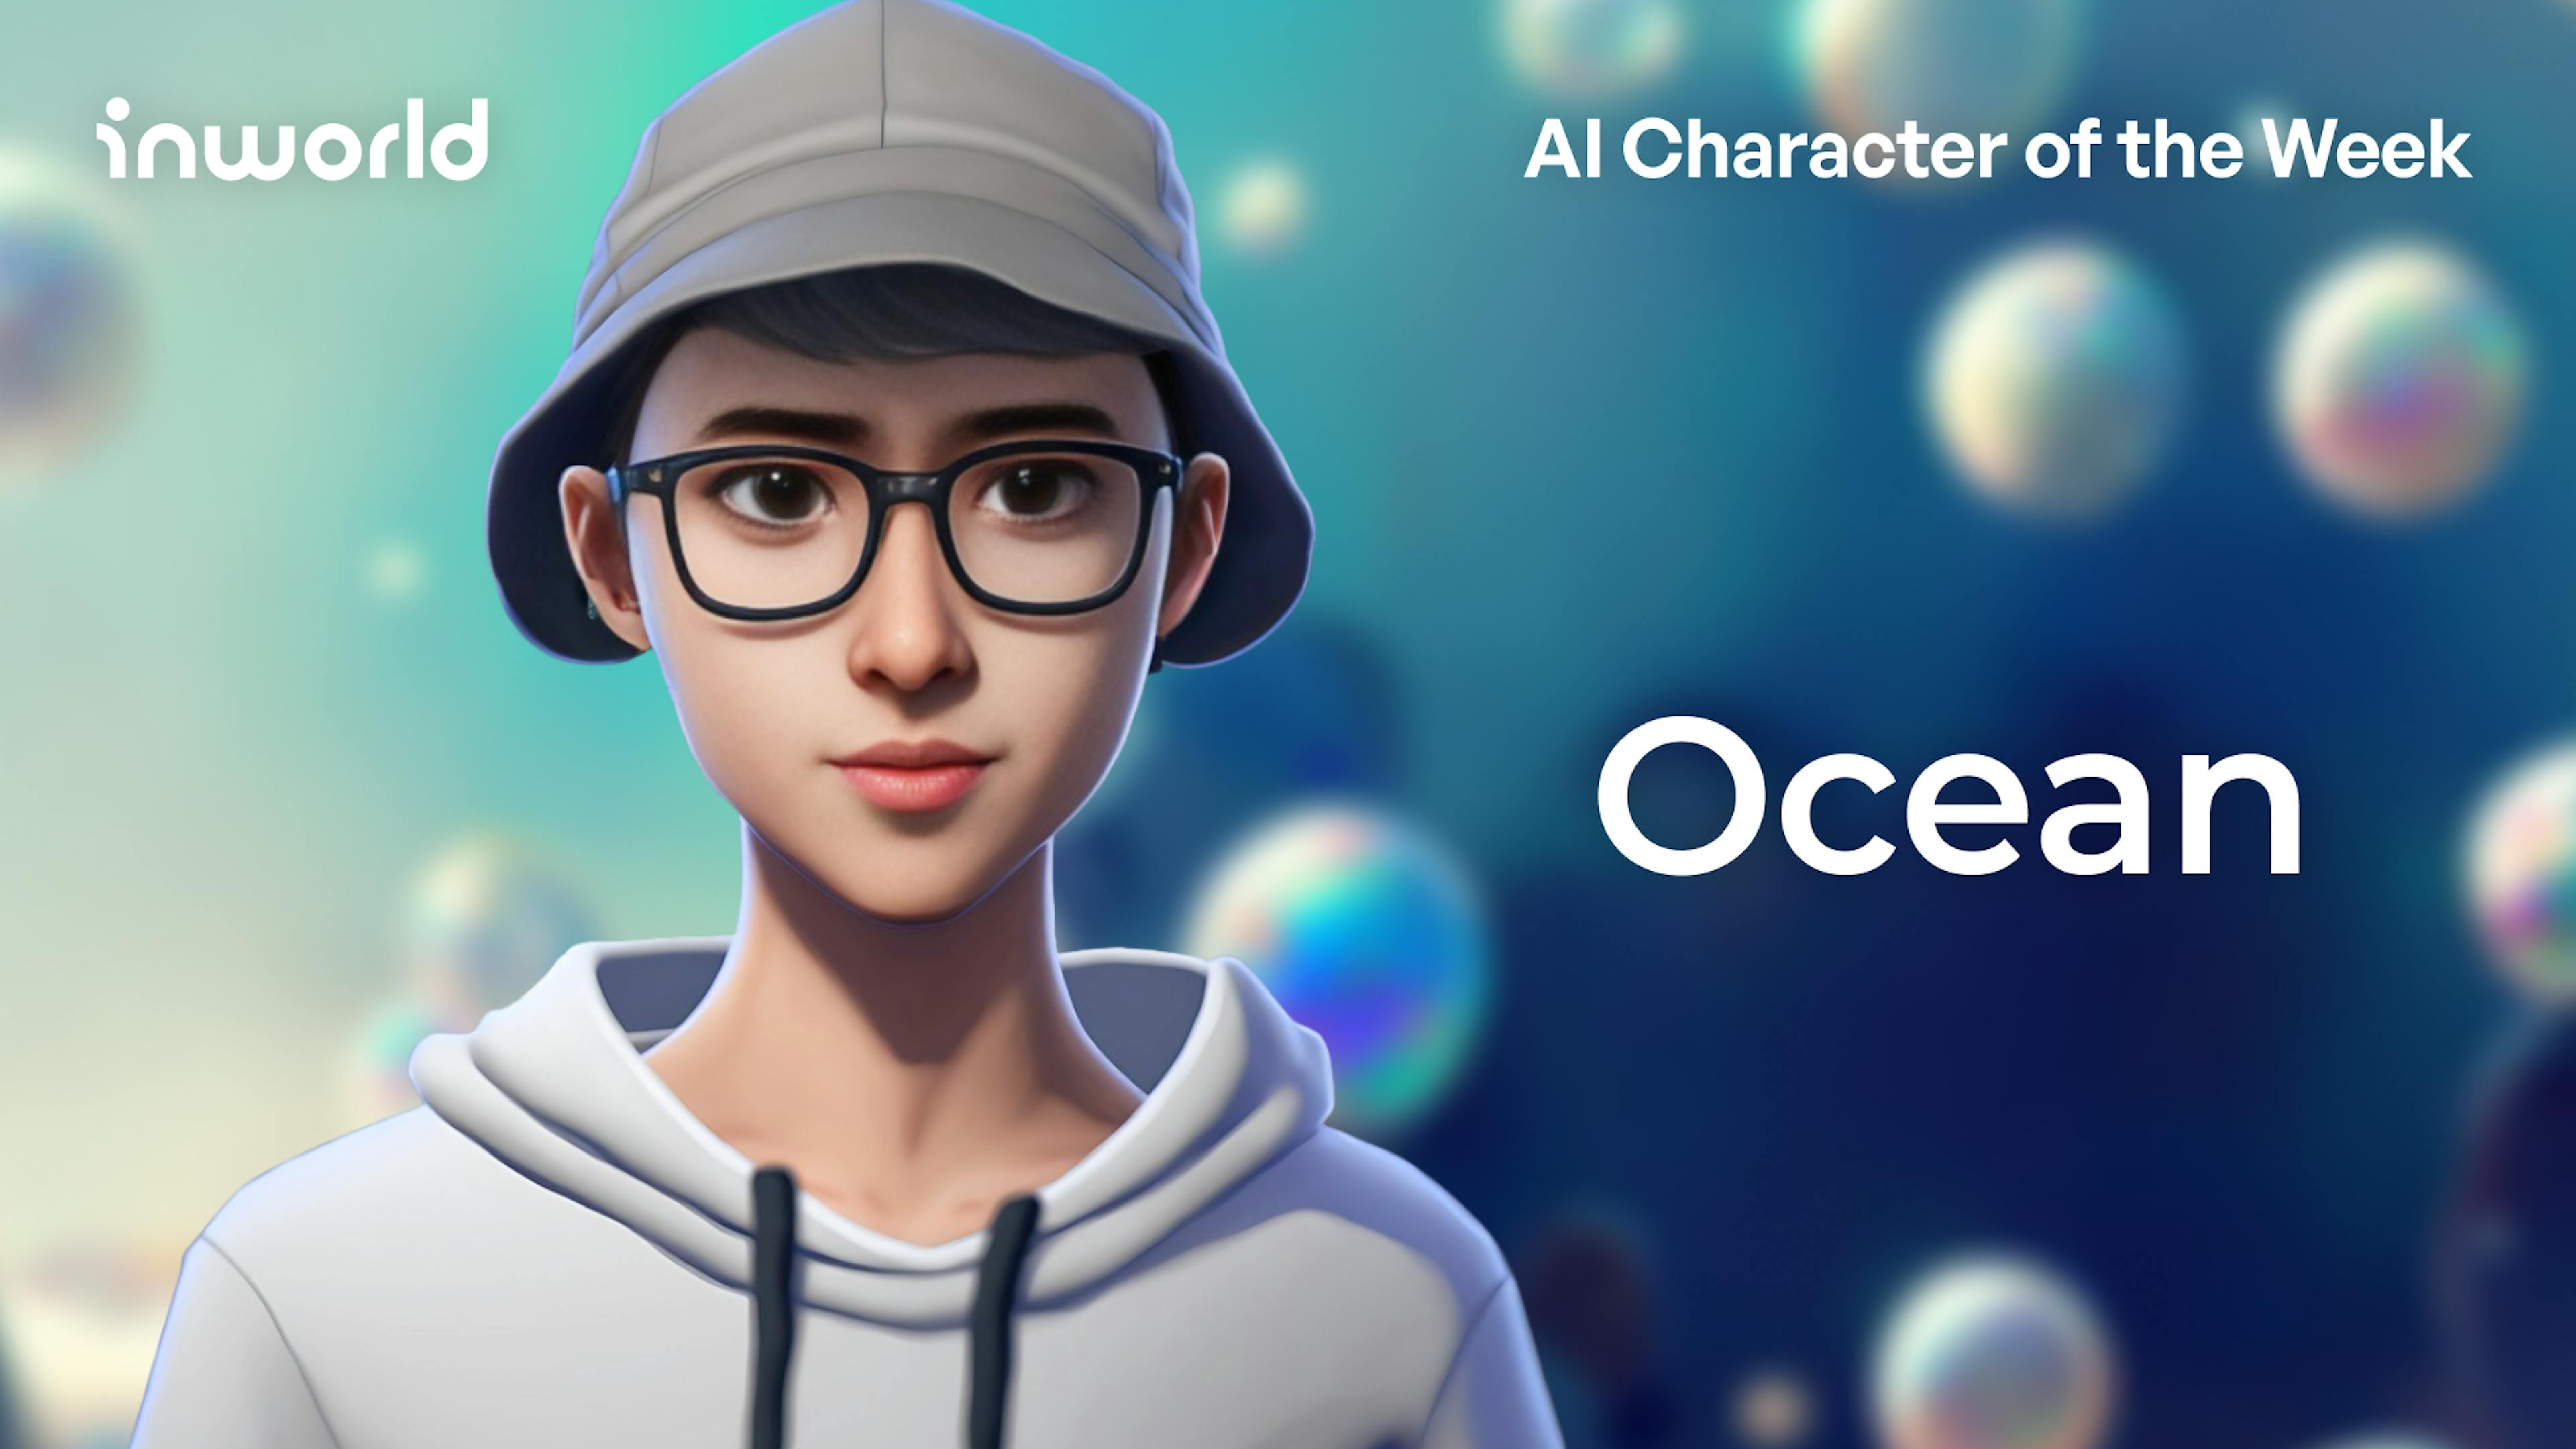 Inquiring minds want to know: What is an AI character?